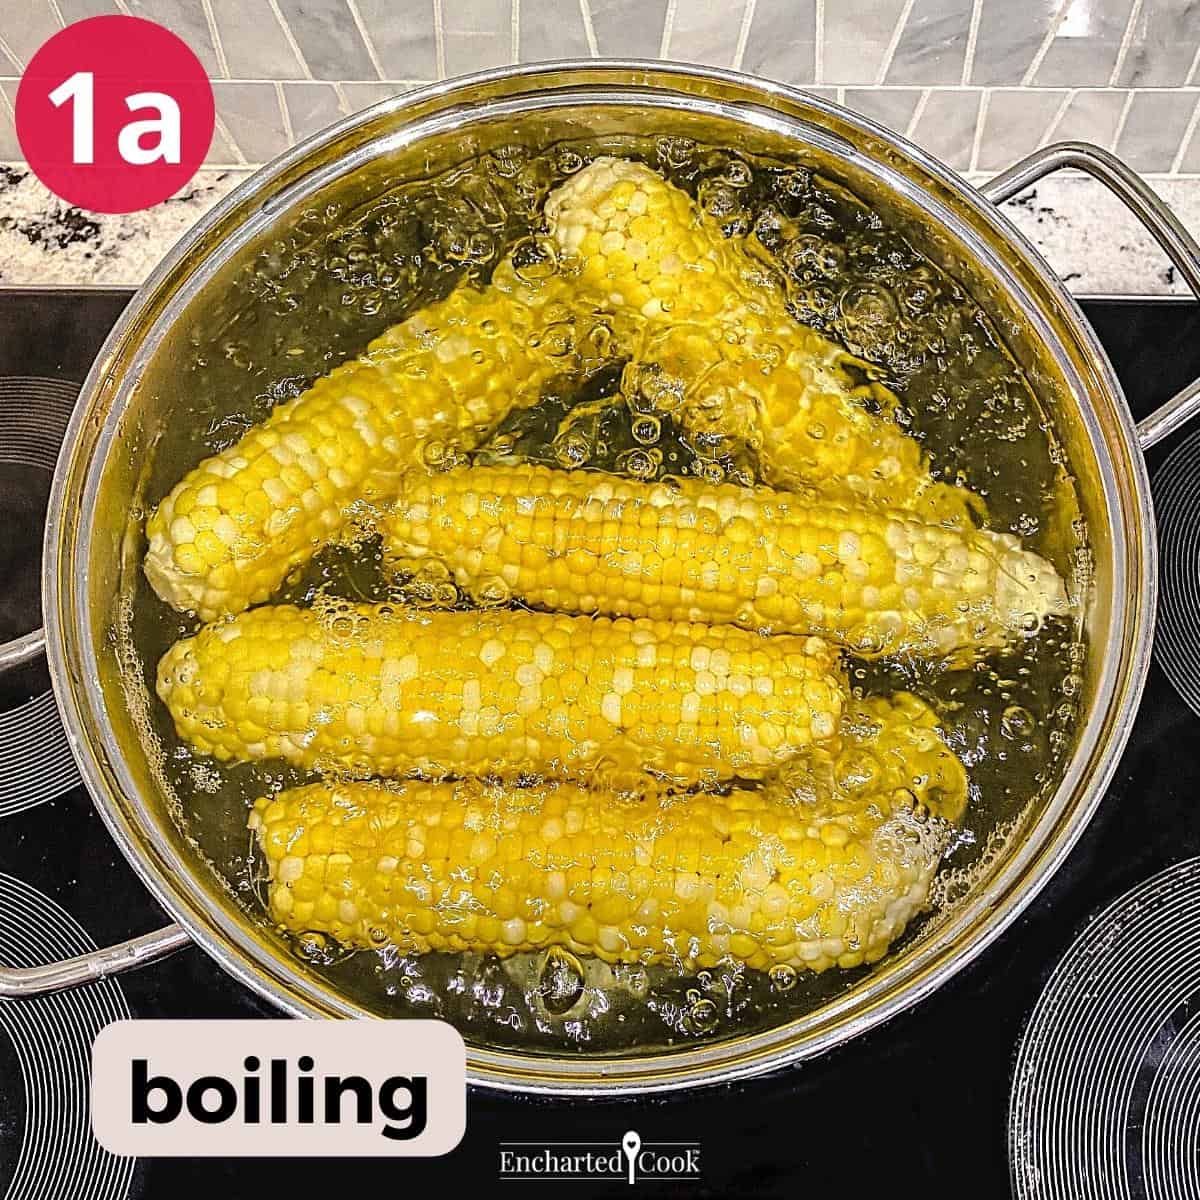 Corn boiling in a large pot on the stove.